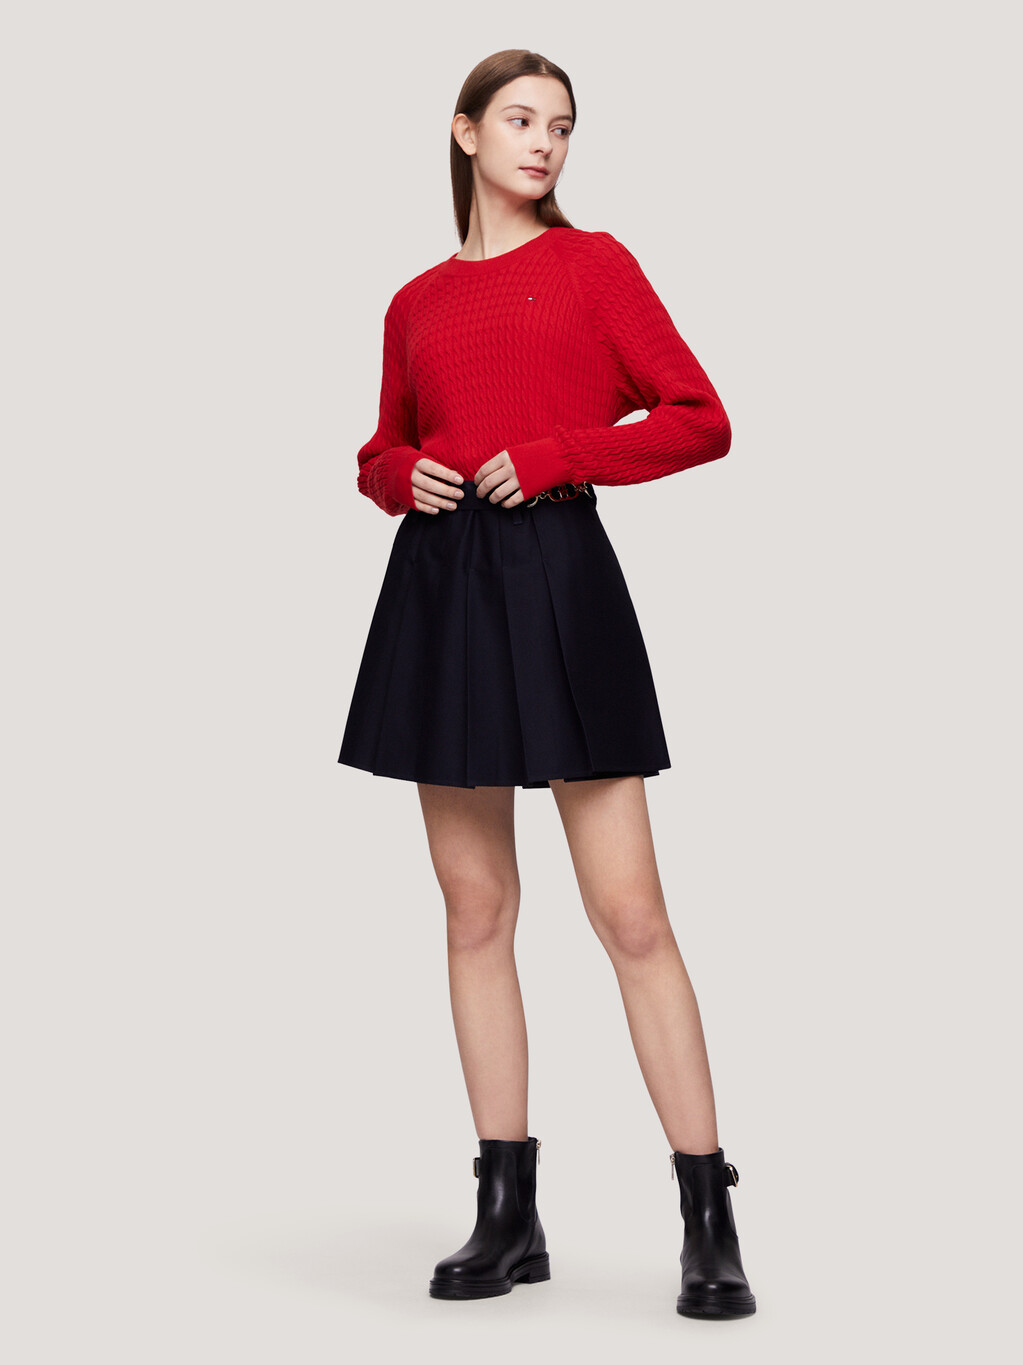 Cable Knit Relaxed Fit Jumper, Fierce Red, hi-res